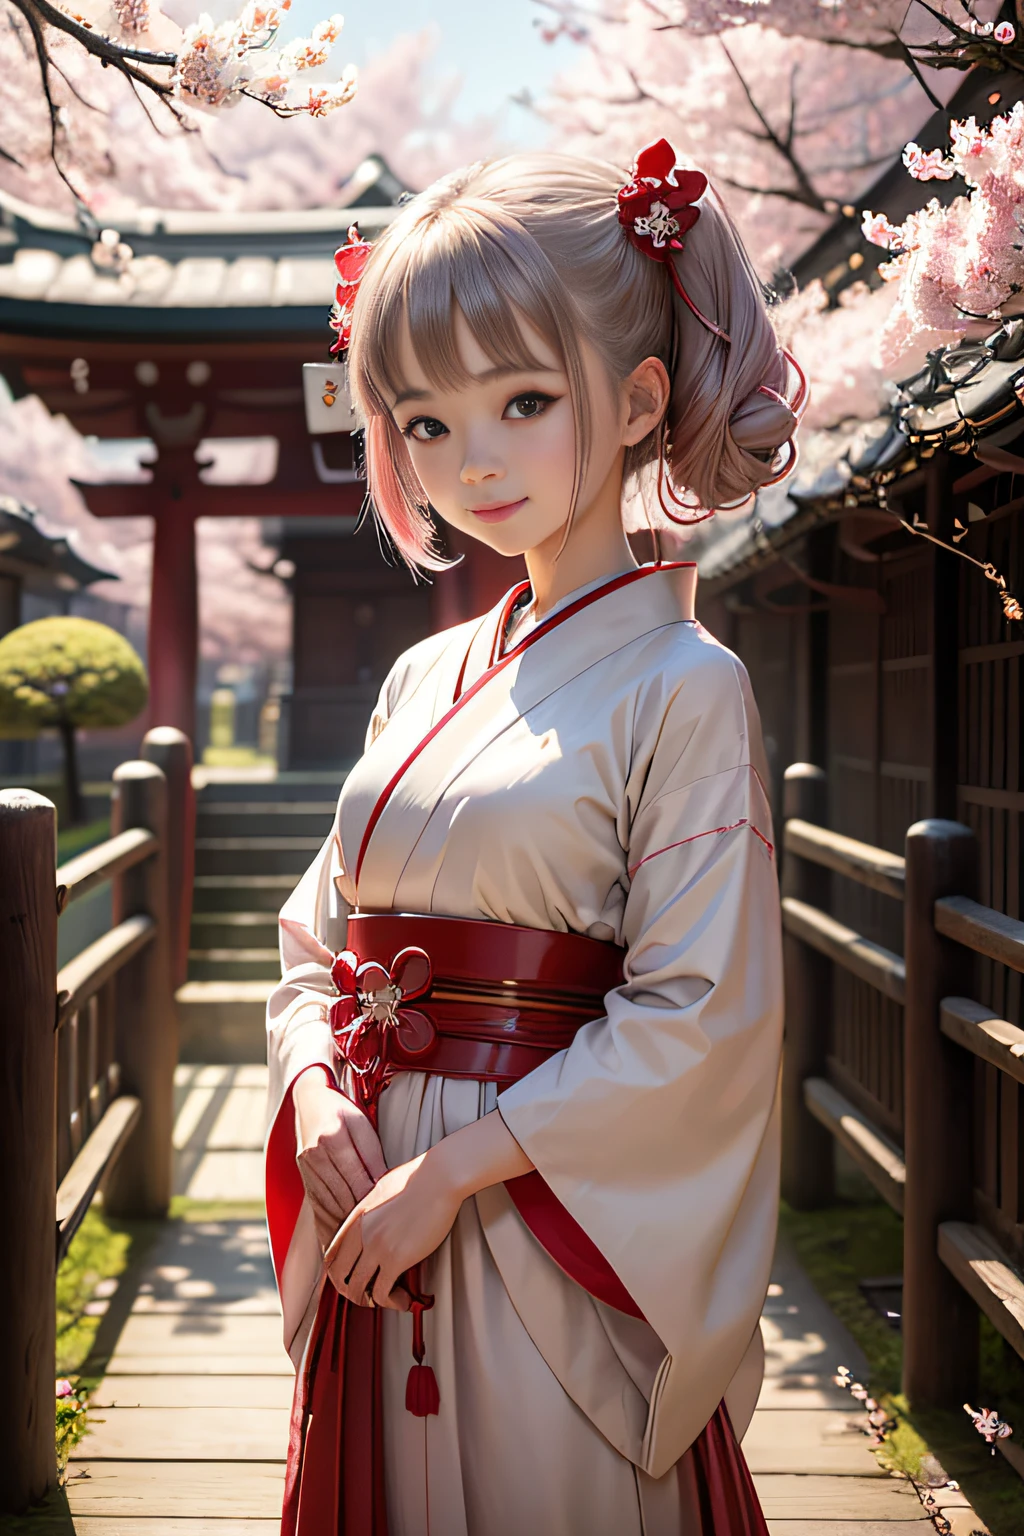 top-quality、８K、photoRealstic、1 girl in、bangss、cute little、17 age、Japanese shrine maiden、White and vermilion hakama、A smile、long、A path lined with flourishing cherry blossom trees、cherryblossom、Vermilion pleats、A detailed eye、A detailed face、